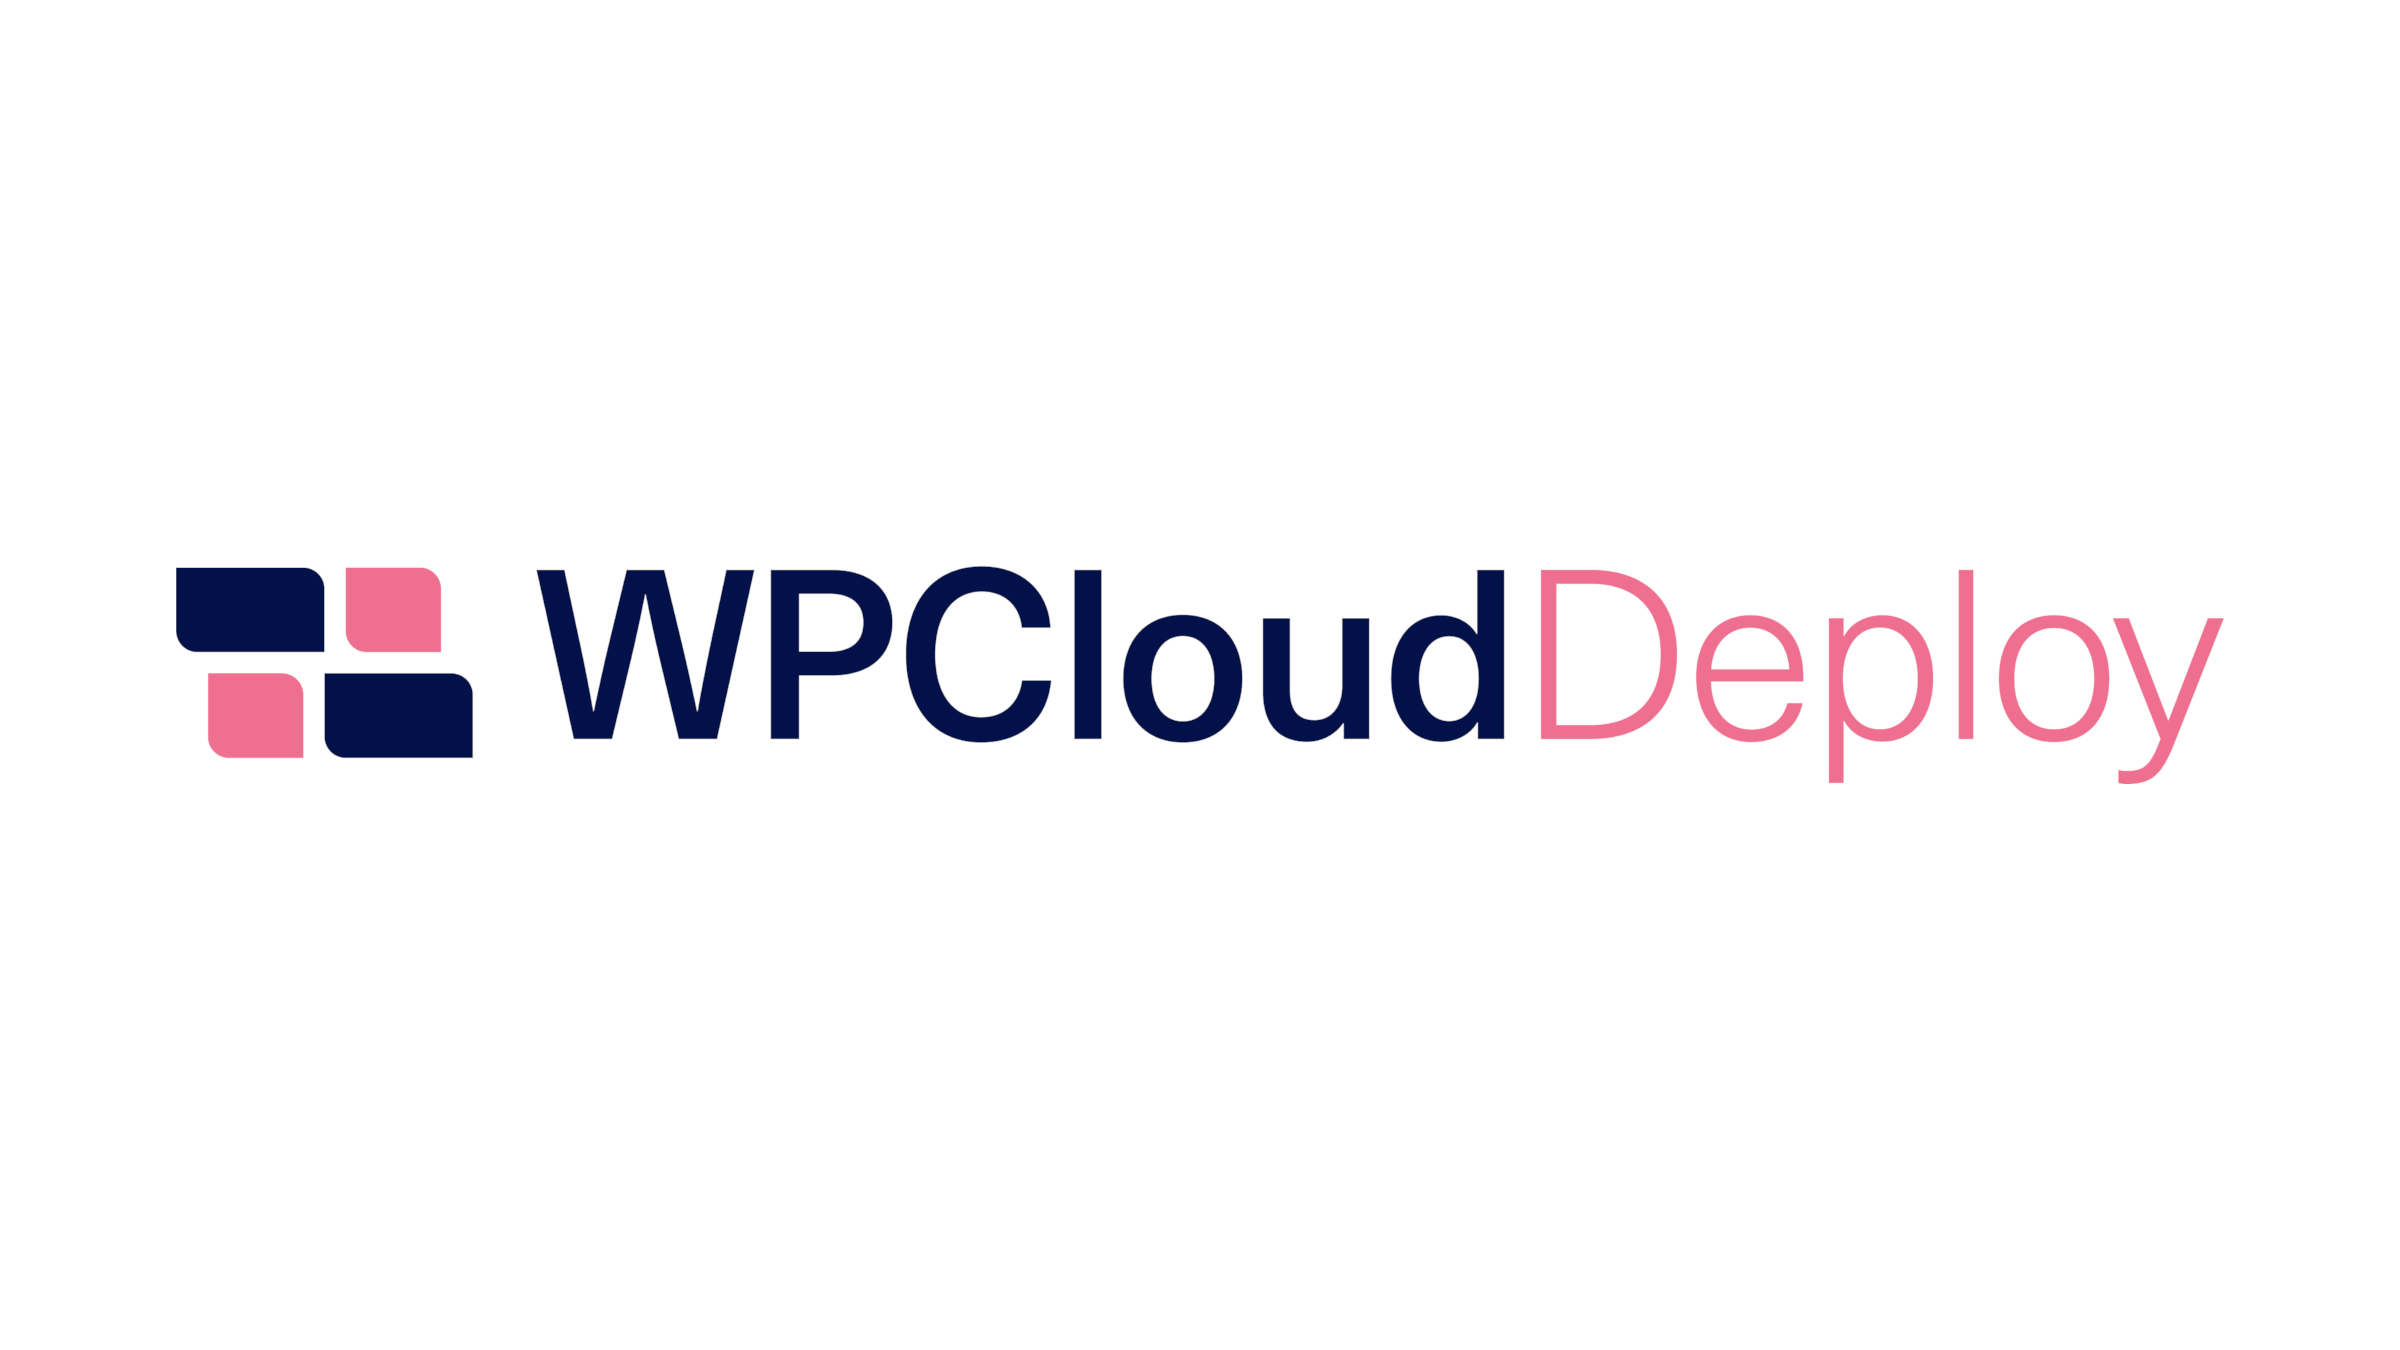 WPCloudDeploy Brings Site and Server Management to the WordPress Admin